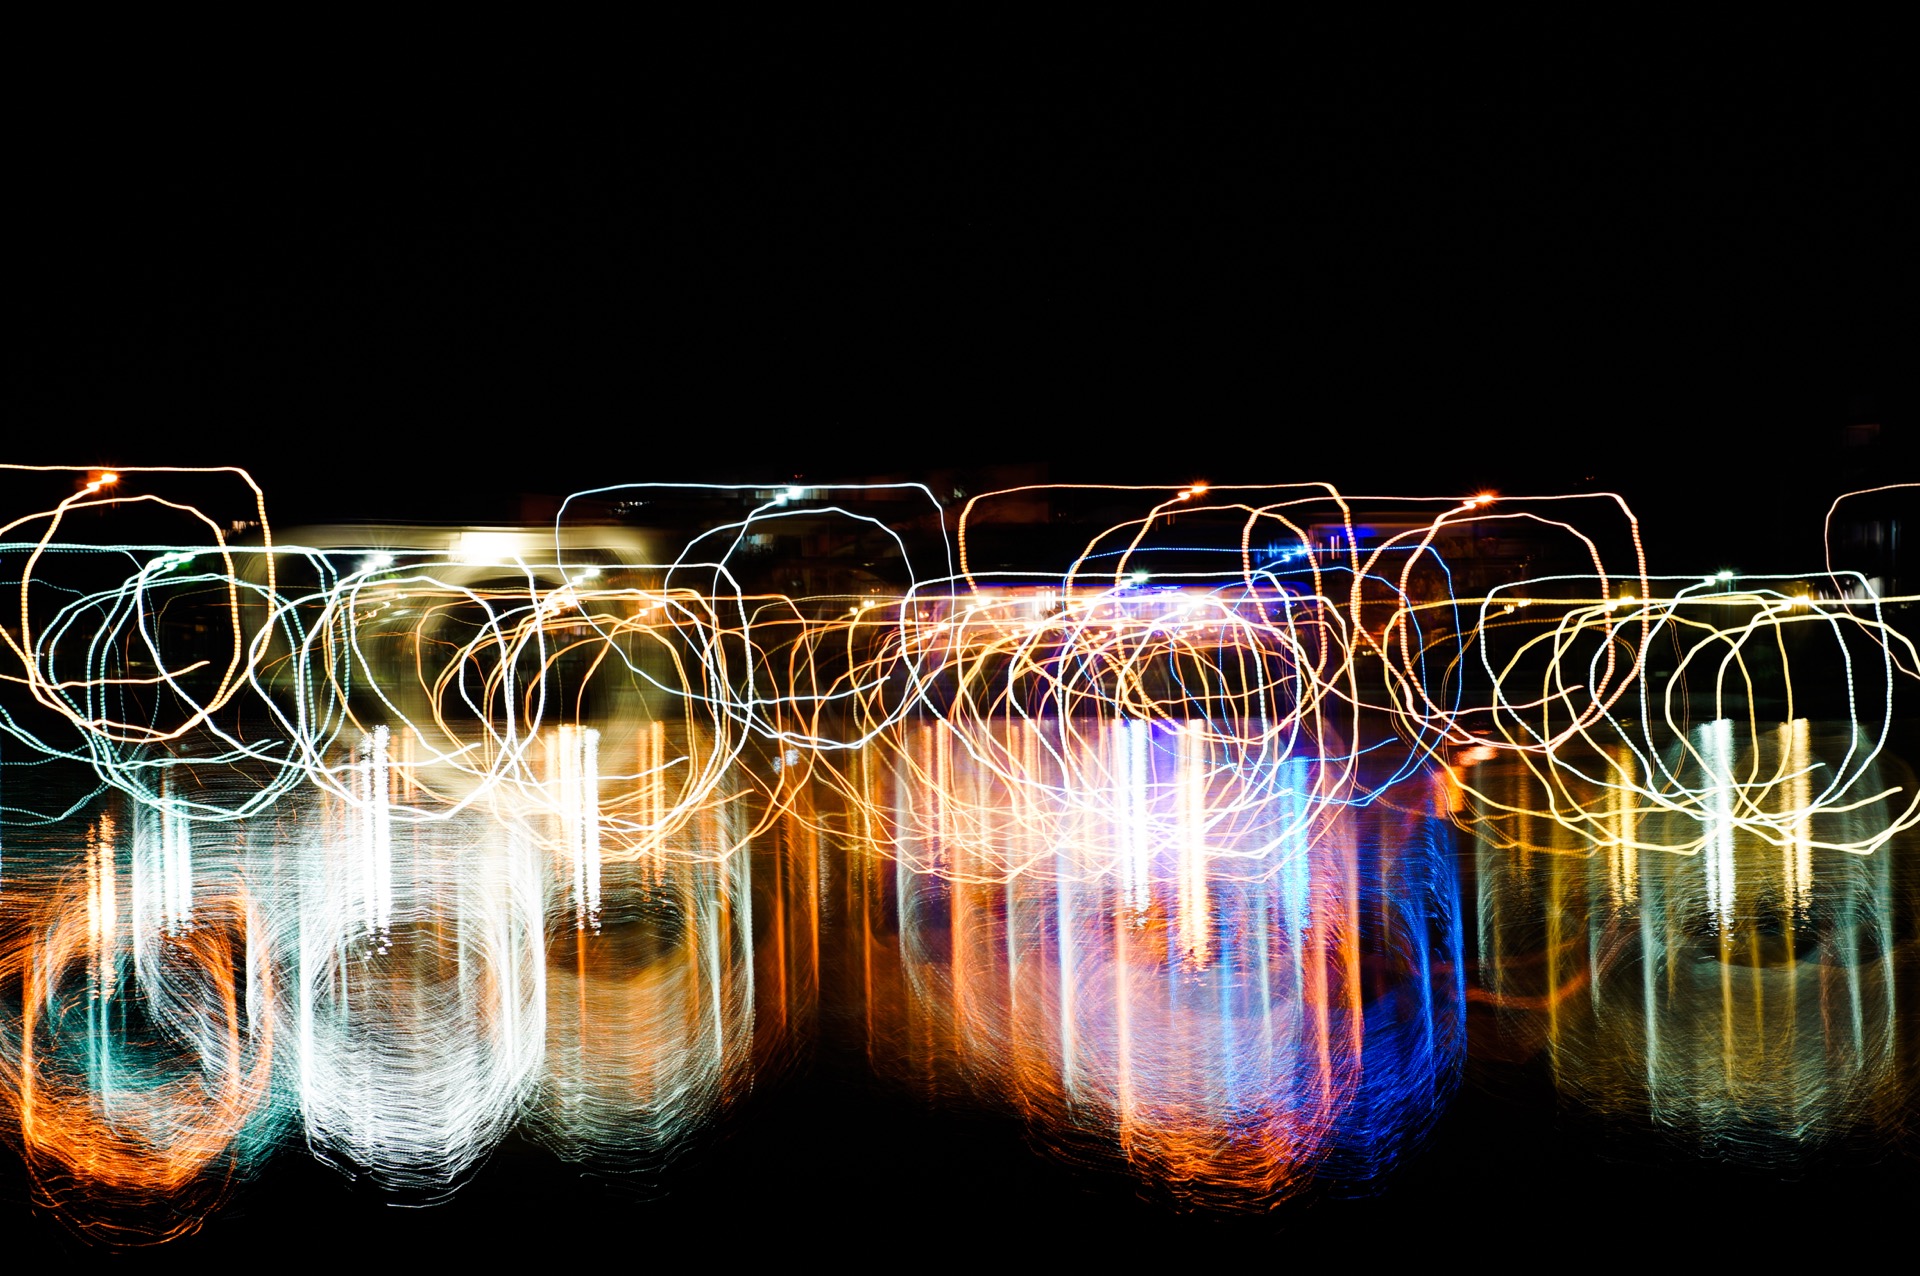 An abstract picture showing spills with their top flattened using light painting technique with vivid mixed rainbow colors on a black background